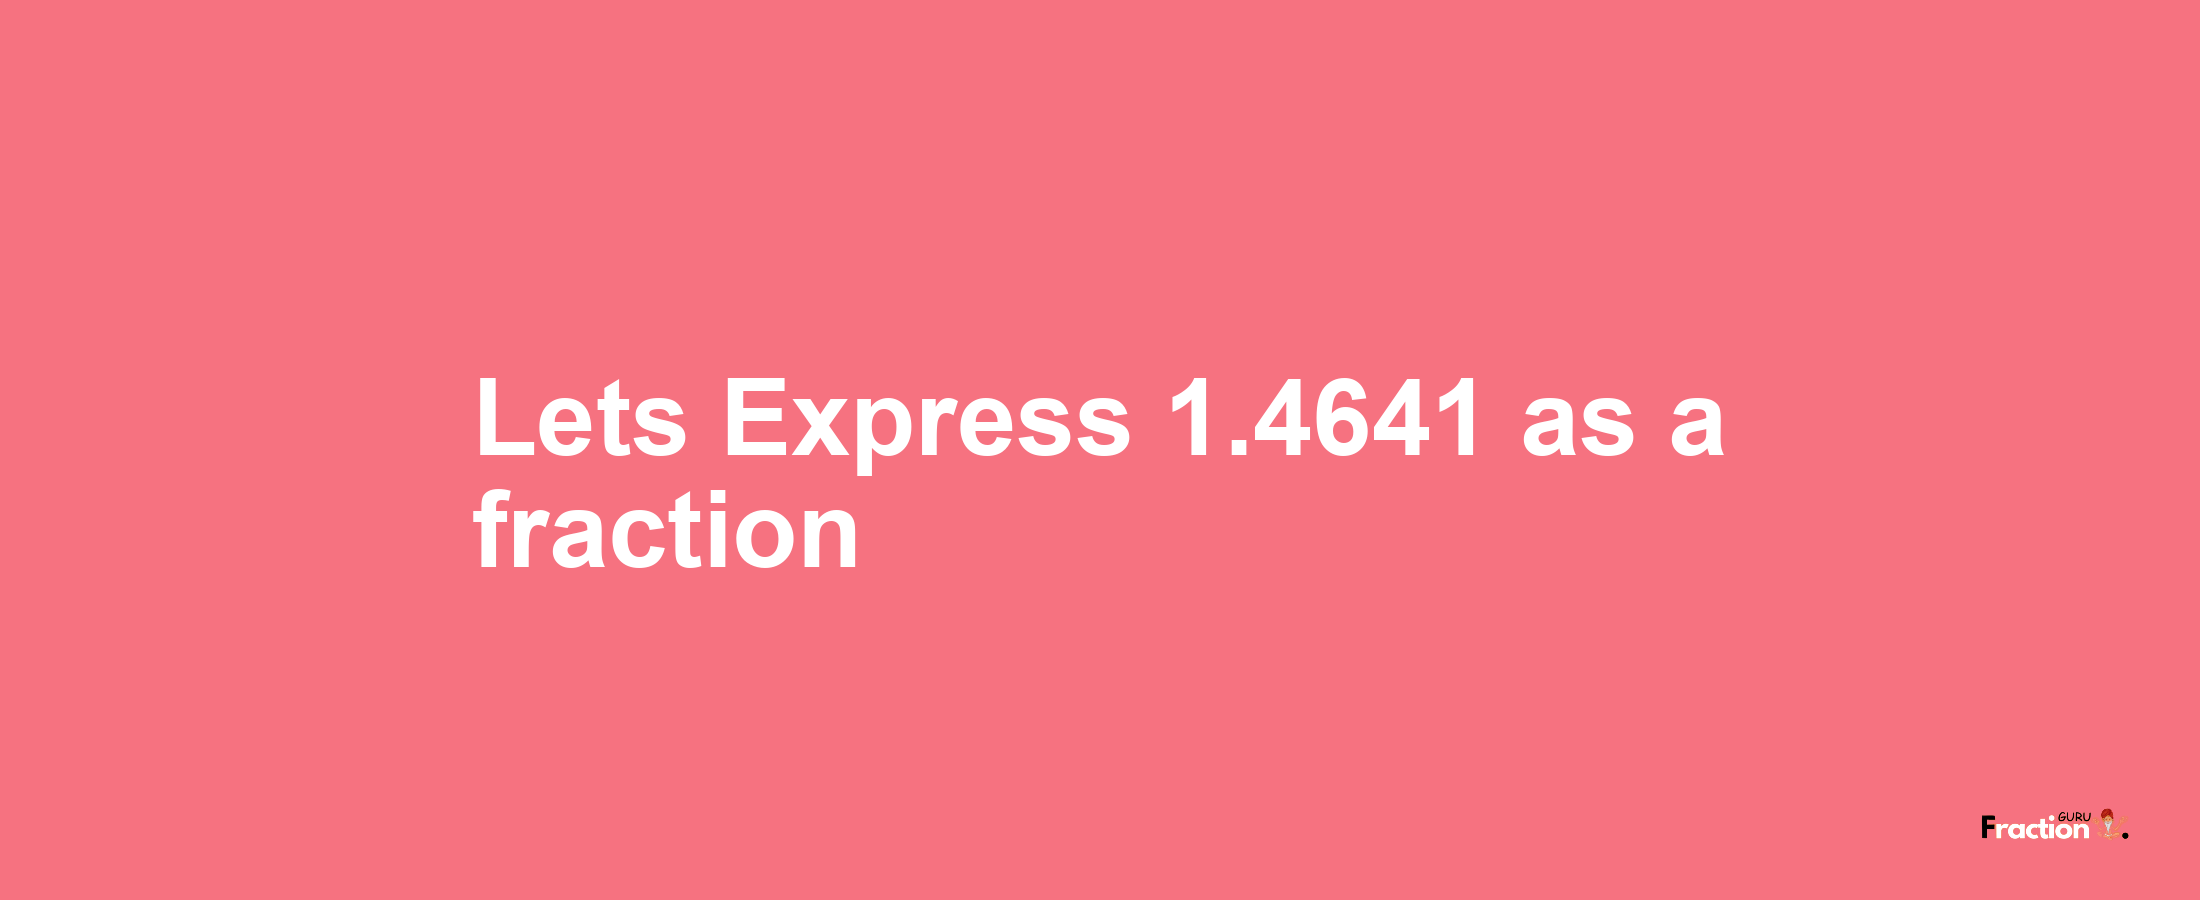 Lets Express 1.4641 as afraction